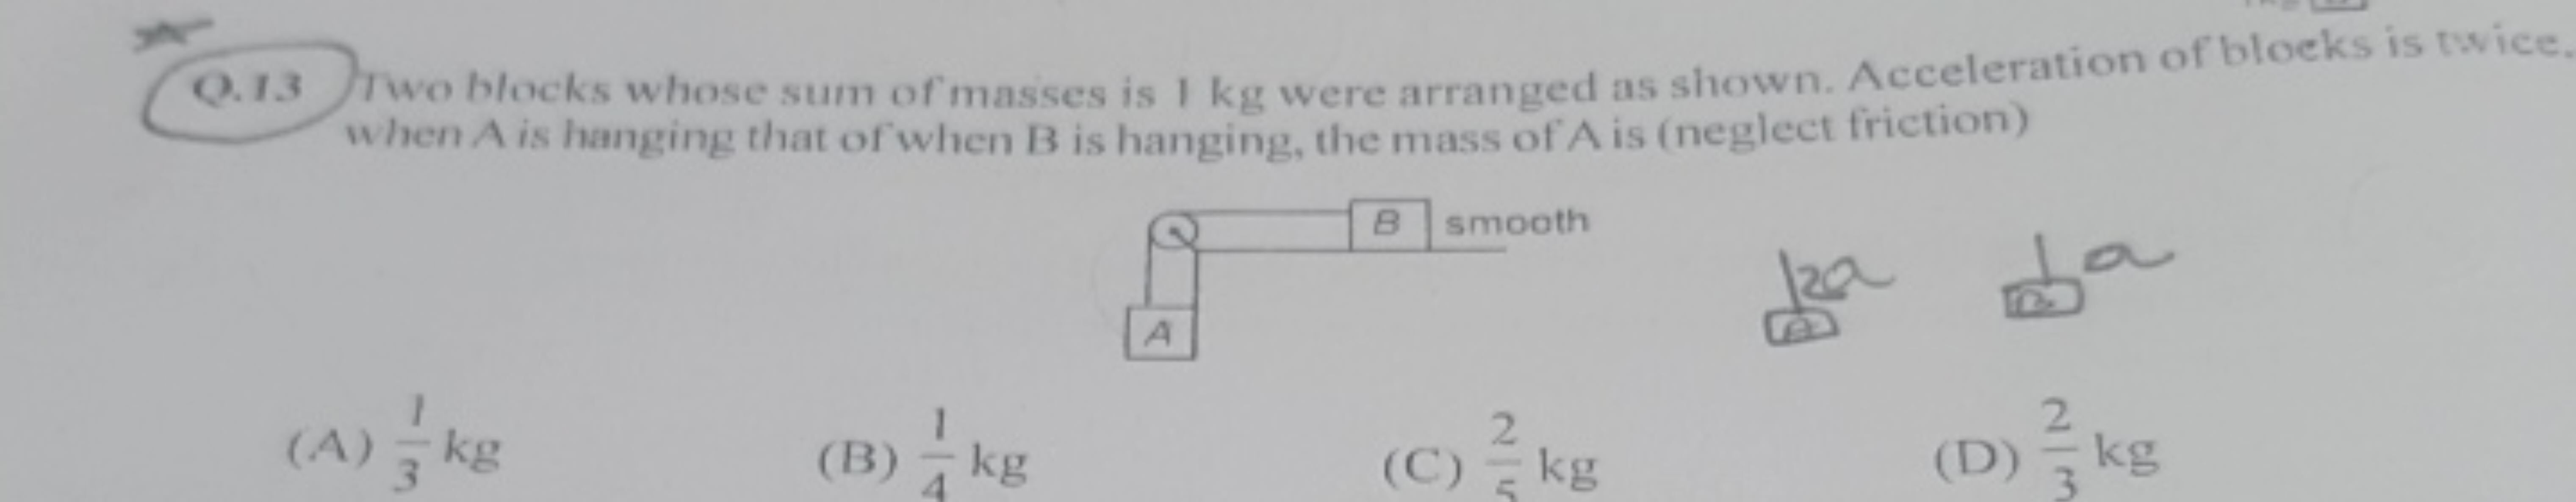 Q.1.3 Two blocks whose sum of masses is 1 kg were arranged as shown. A